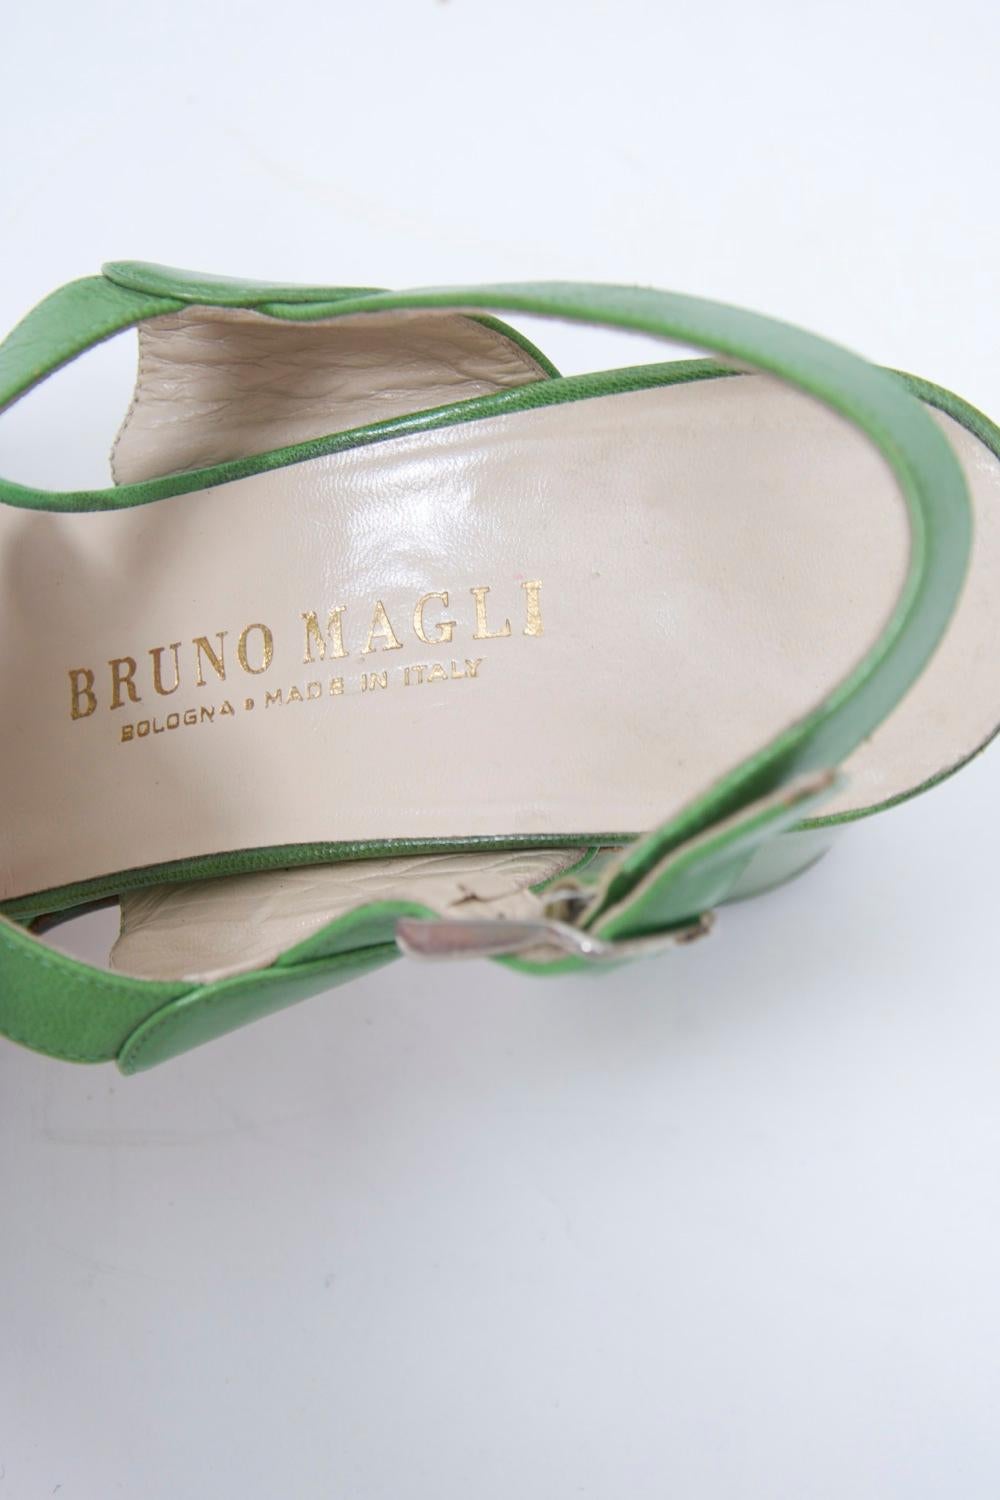 1970s Bruno Magli Platform Sandals In Good Condition For Sale In Alford, MA